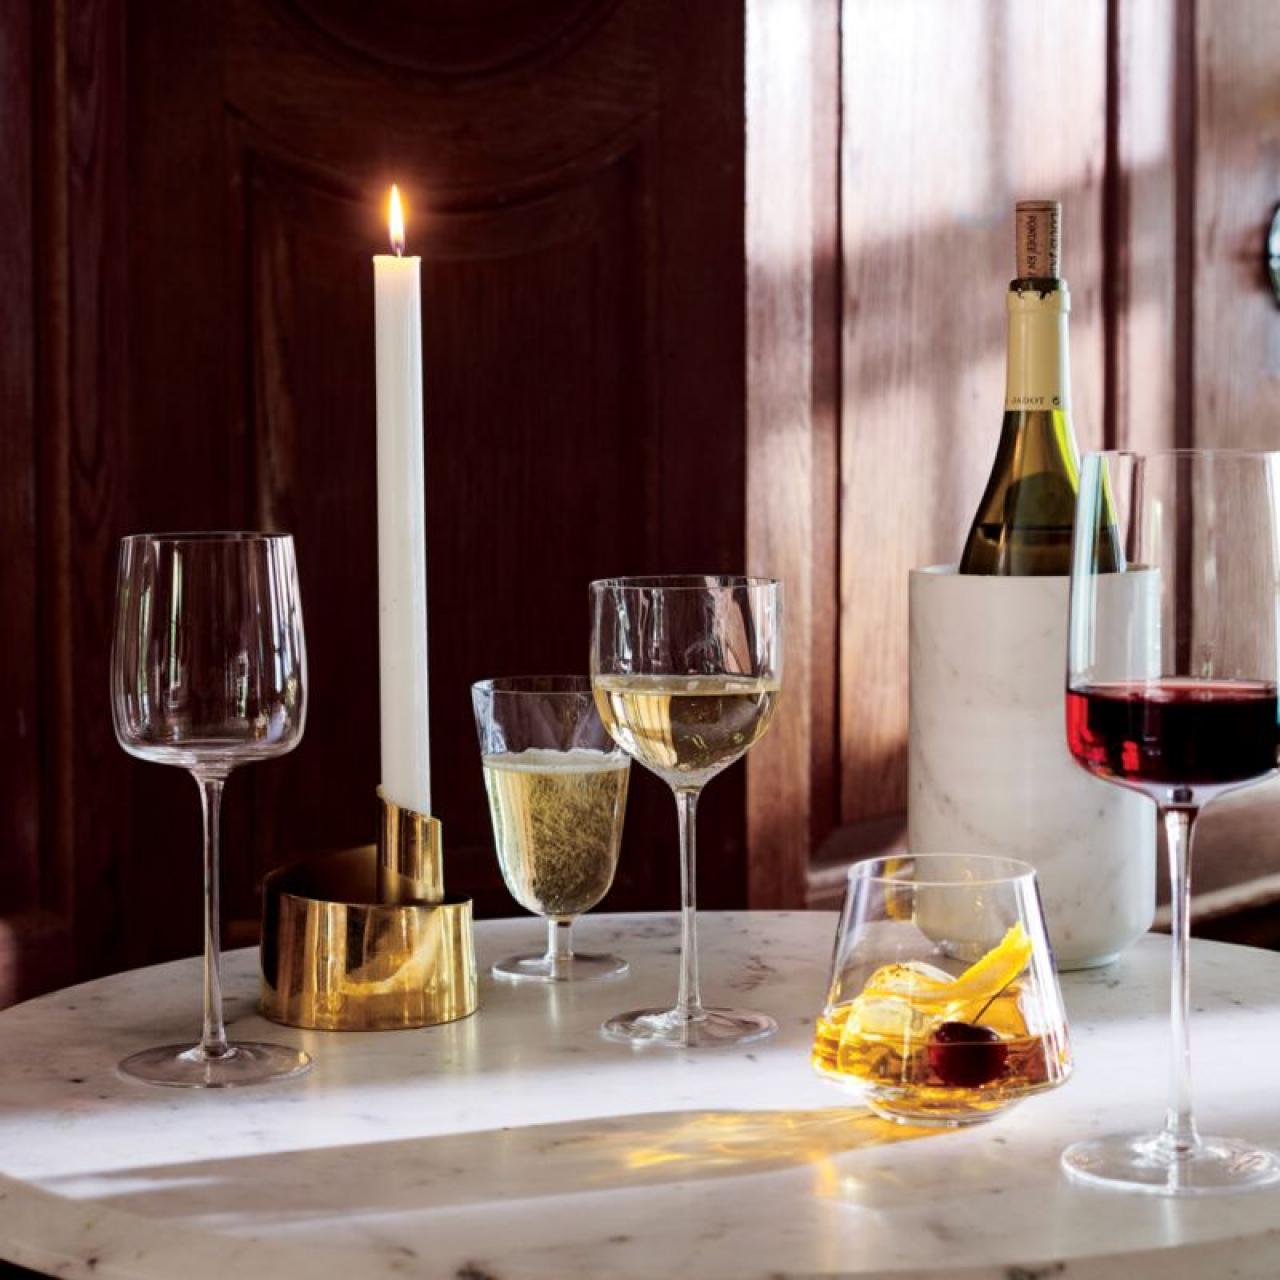 https://food.fnr.sndimg.com/content/dam/images/food/products/2022/11/14/rx_stone-cold-marble-wine-chiller.jpeg.rend.hgtvcom.1280.1280.suffix/1668469395612.jpeg